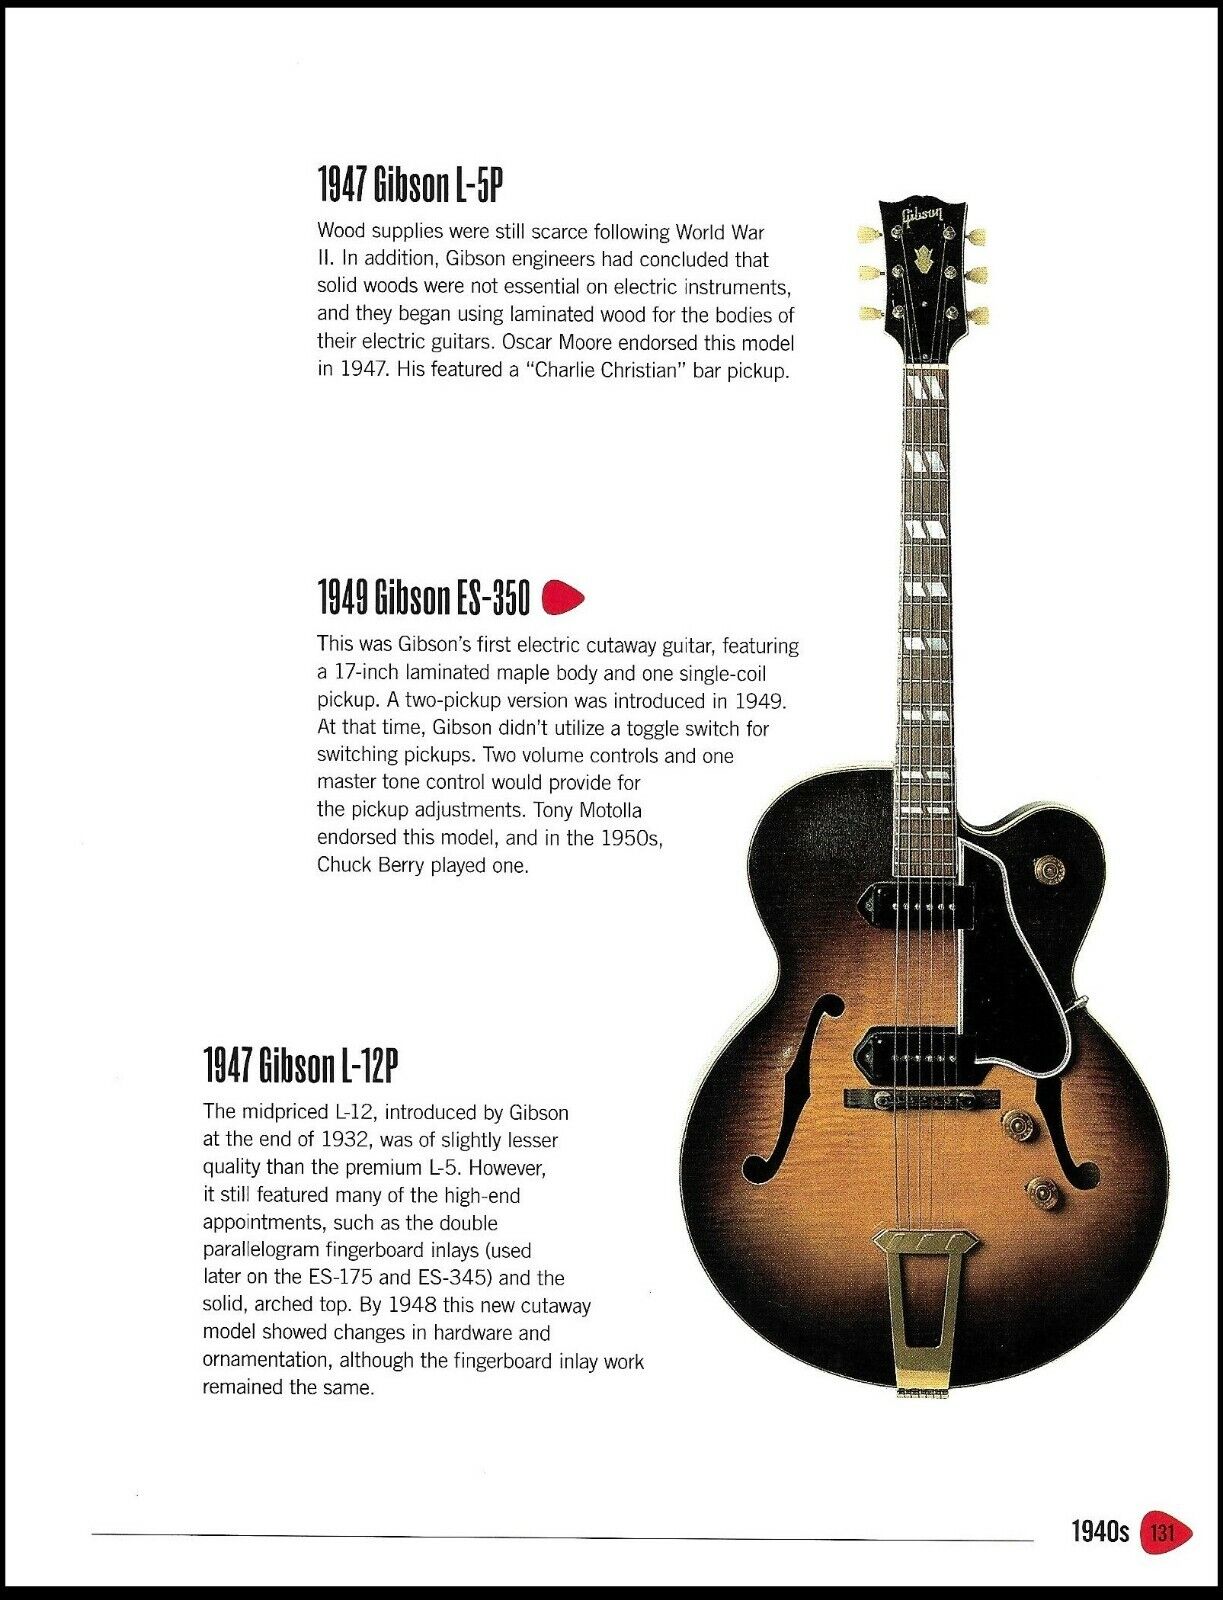 1949 Gibson ES-350 electric vintage guitar history article + 1940 Gibson L-7 ED